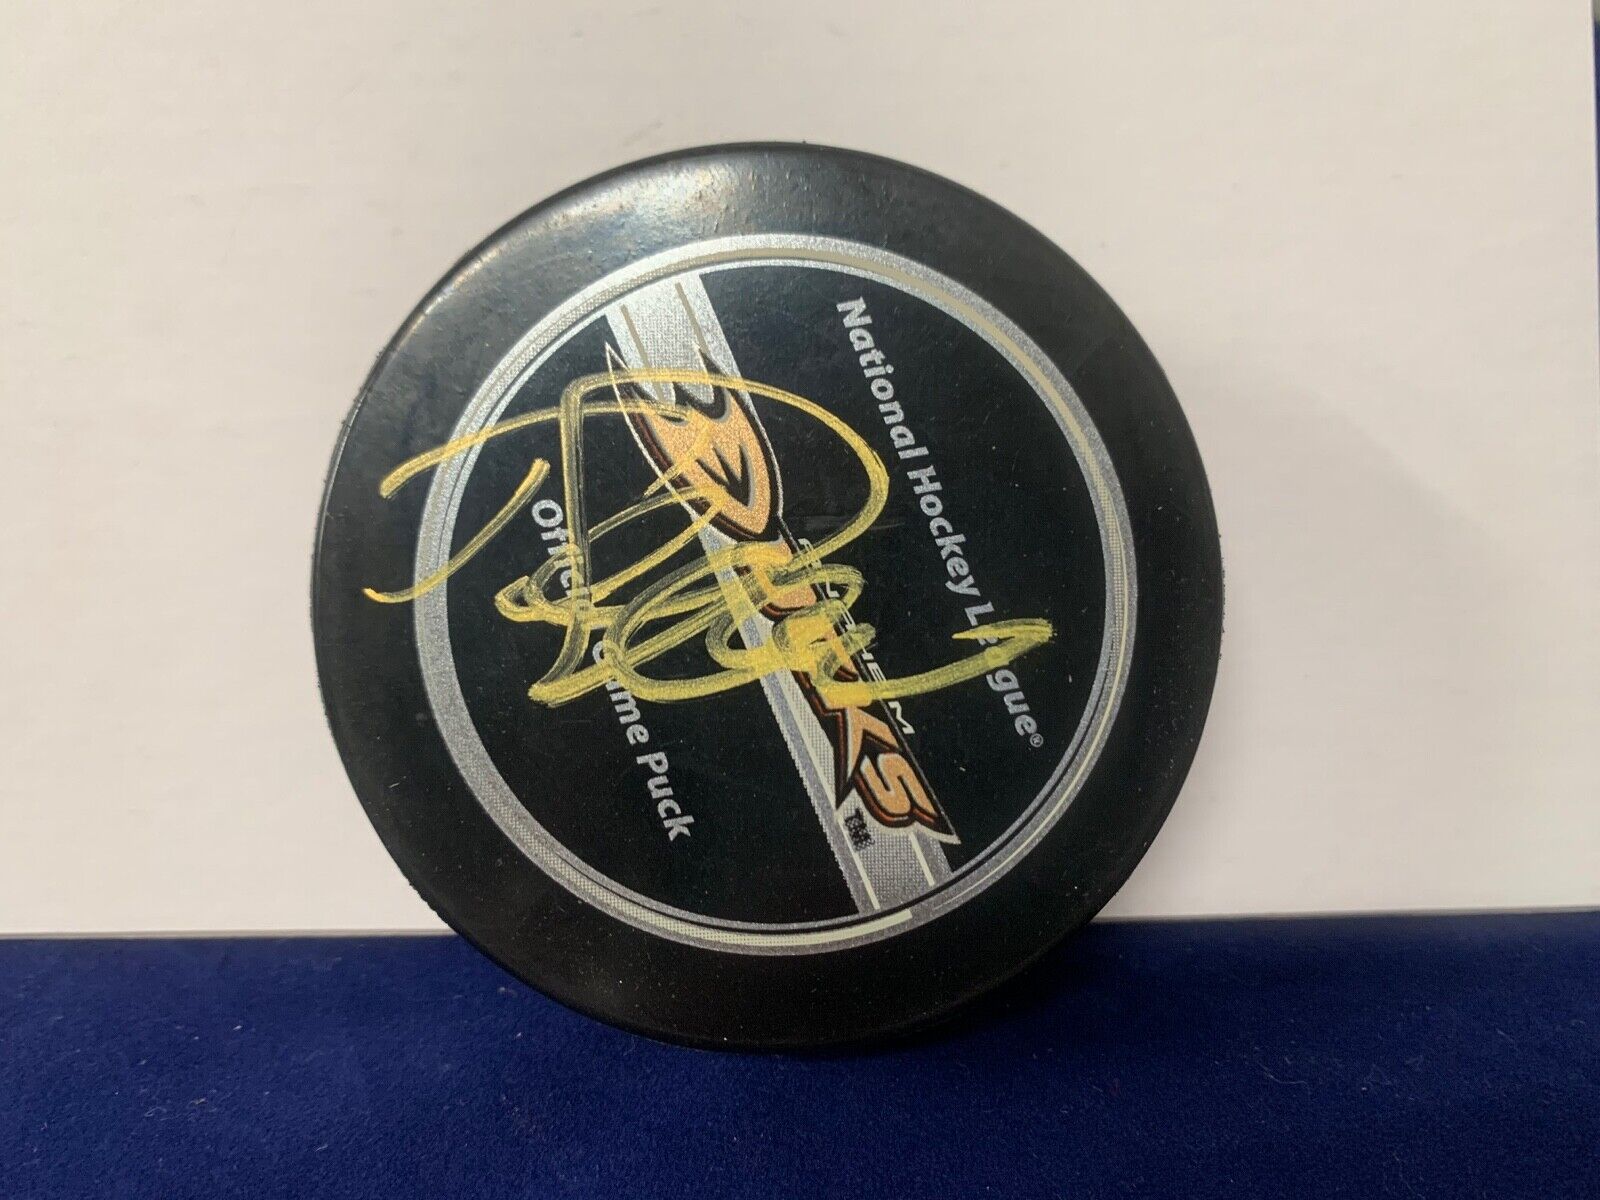 Teemu Selanne Autographed Signed NHL Official Game Puck with PSA COA Ducks Logo